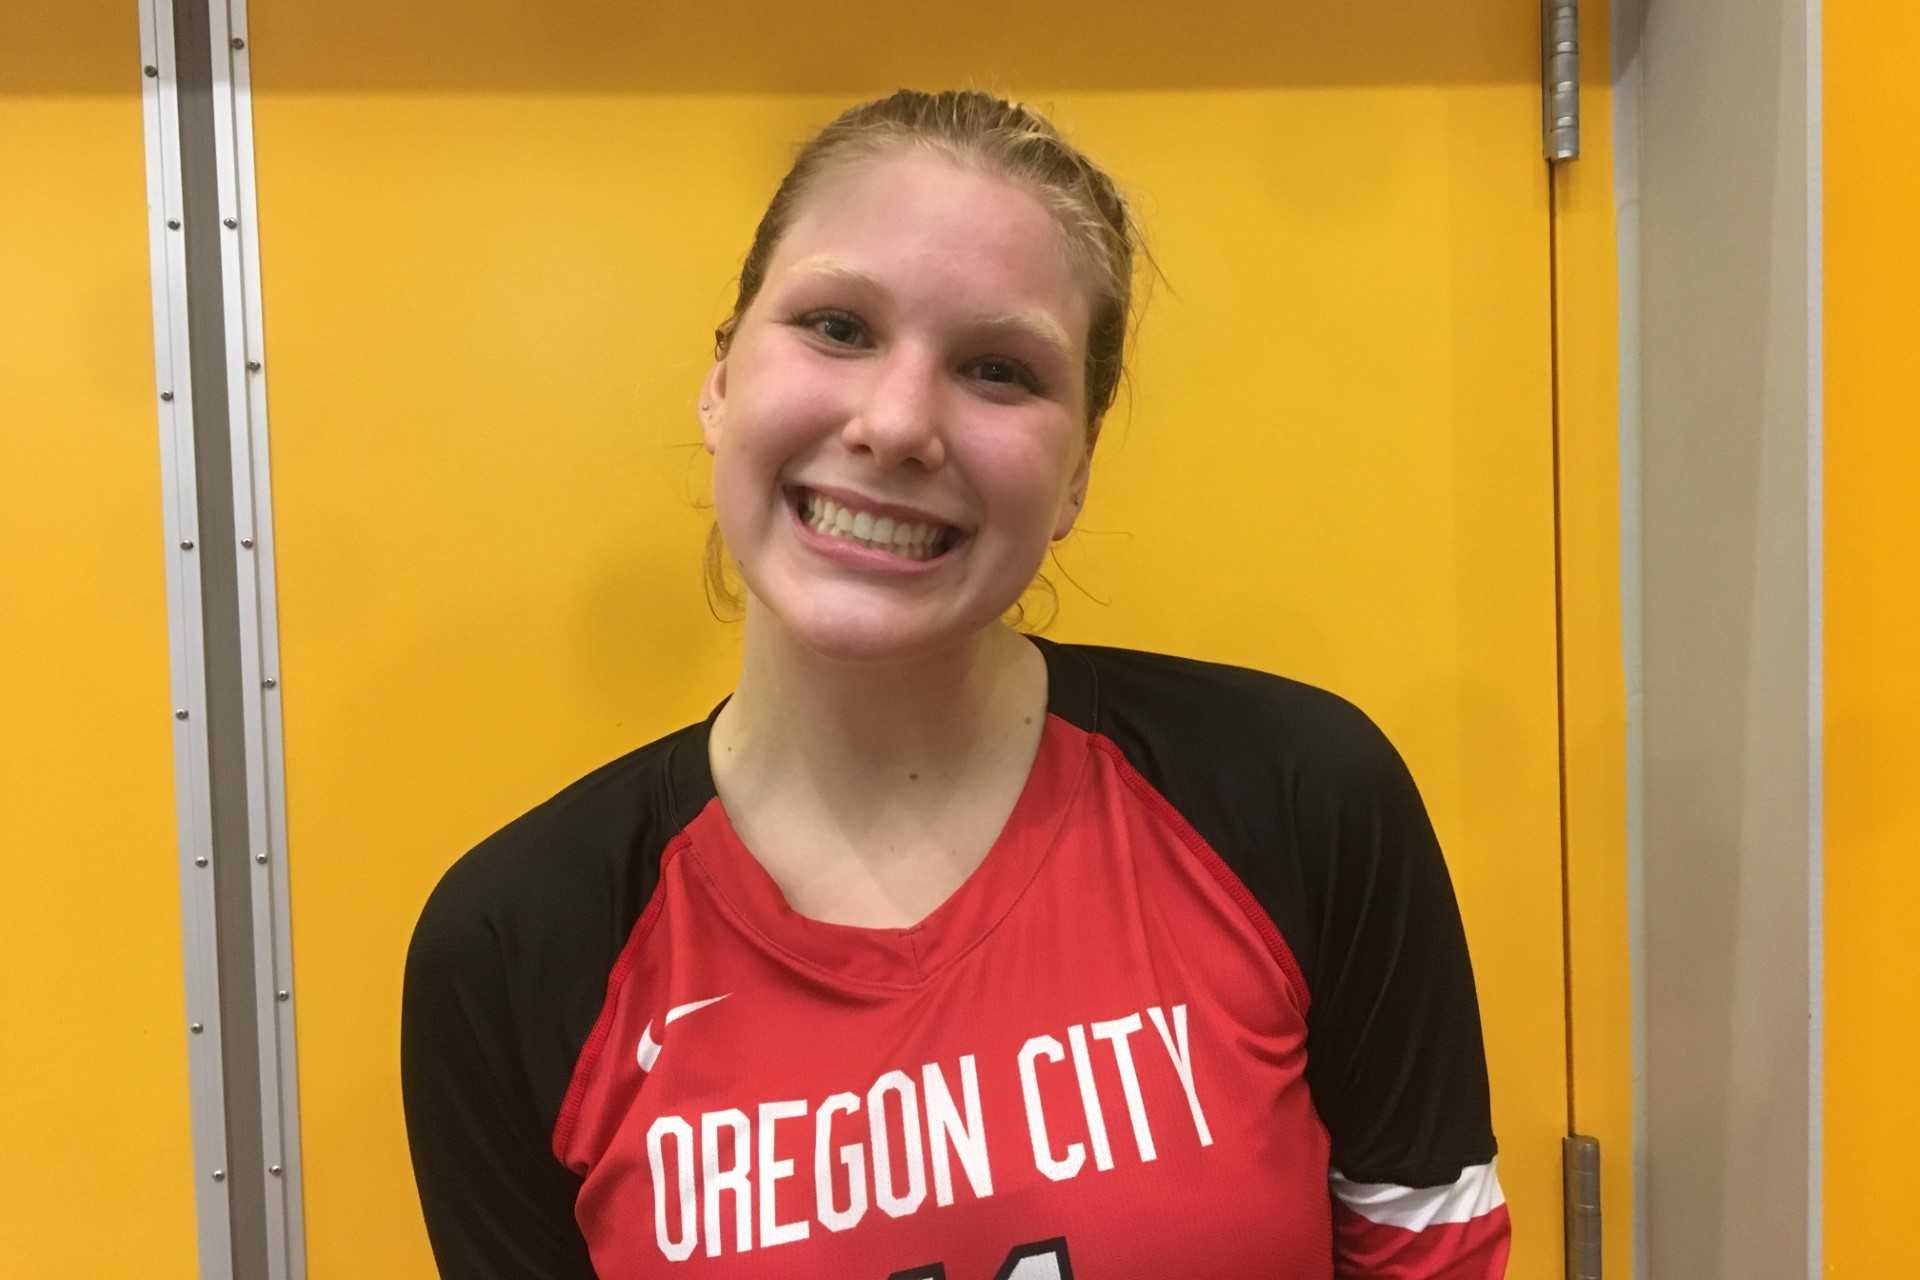 Oregon City junior Paige Thies had 49 kills in quarterfinal and semifinal wins Friday, propelling her team to the 6A final.